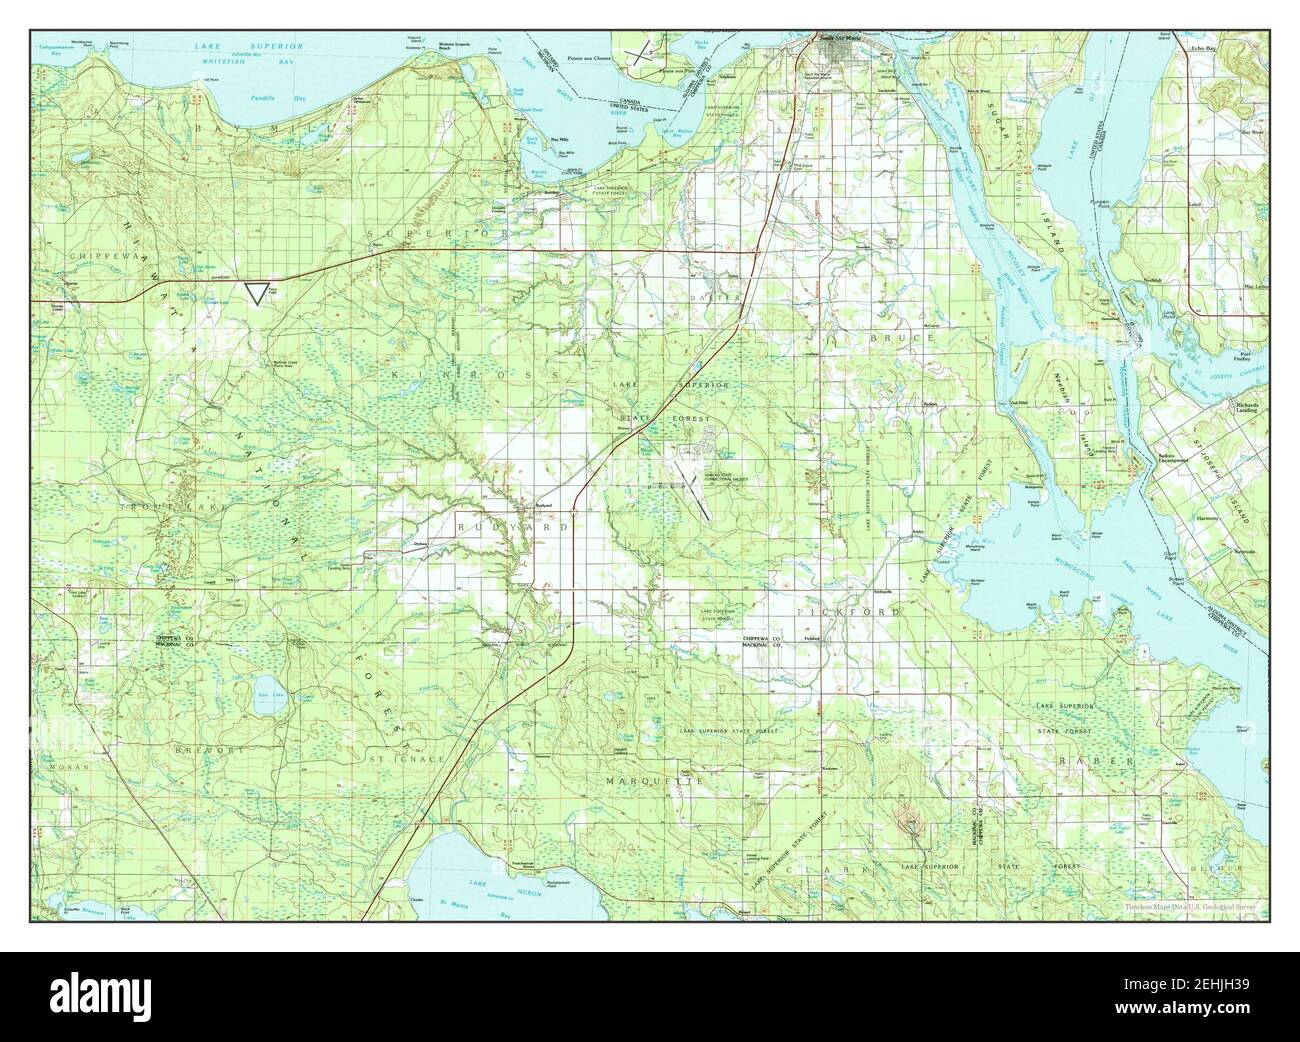 Sault Ste Marie South, Michigan, map 1984, 1:100000, United States of America by Timeless Maps, data U.S. Geological Survey Stock Photo